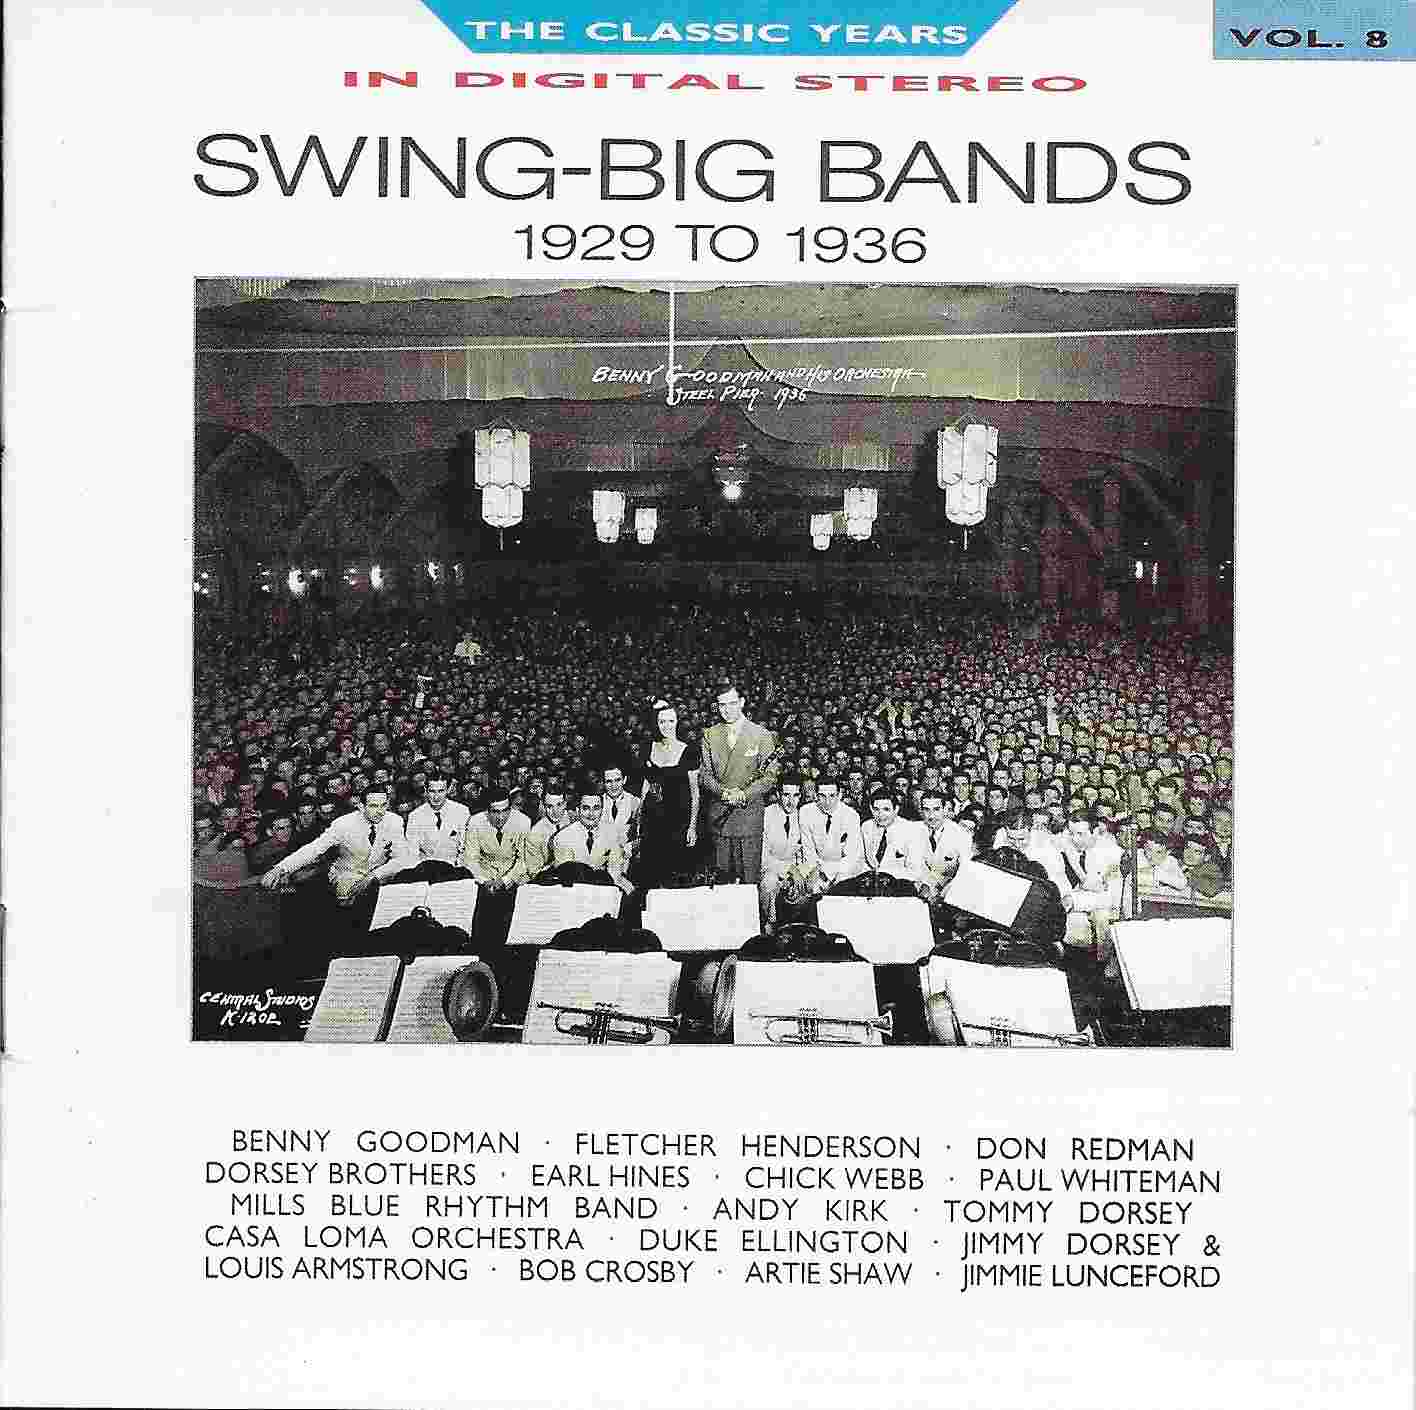 Picture of BBCCD655 Classic years - Volume 8, Swing big bands by artist Various from the BBC cds - Records and Tapes library